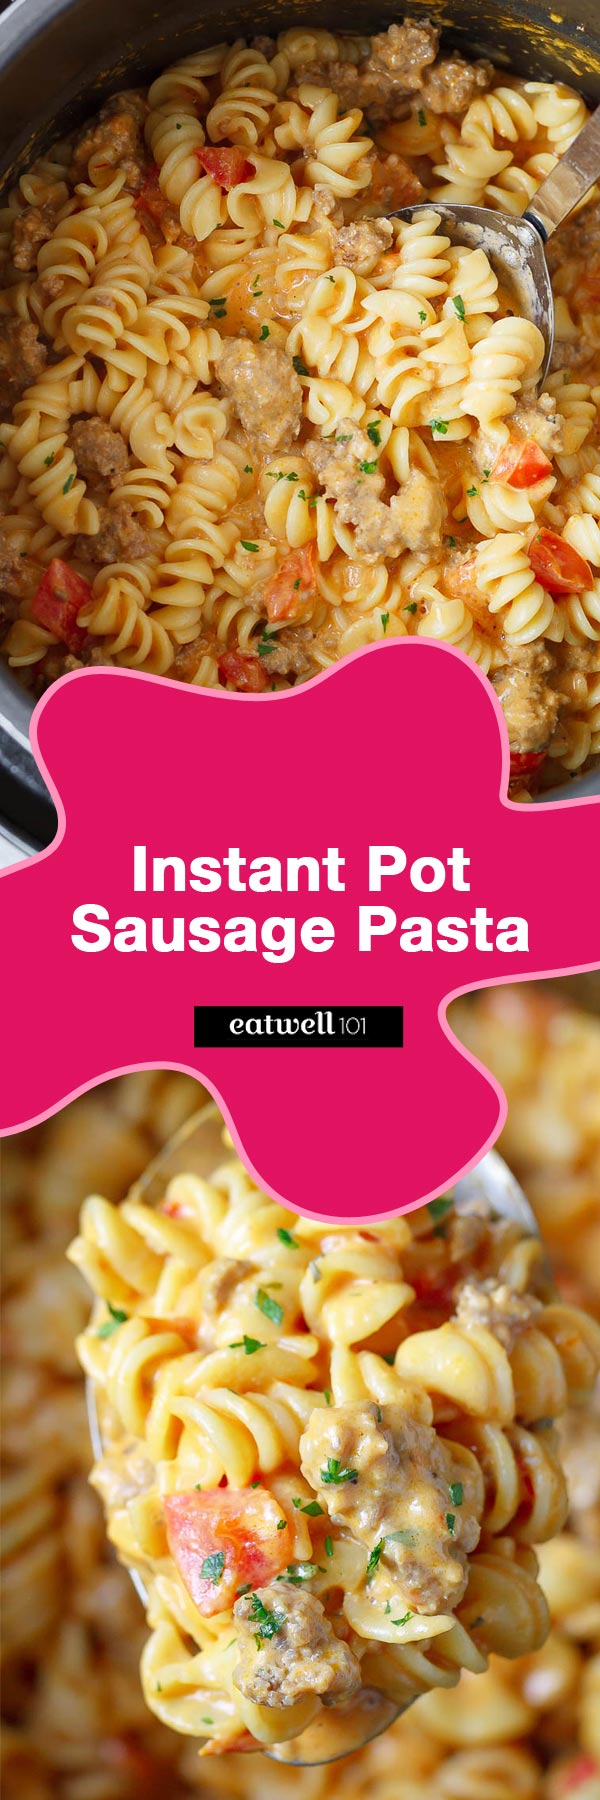 Instant Pot Sausage Pasta in Cream Cheese Tomato Sauce - A Quick and easy one-pot dinner made entirely in the pressure cooker. You will definitely love this one! 